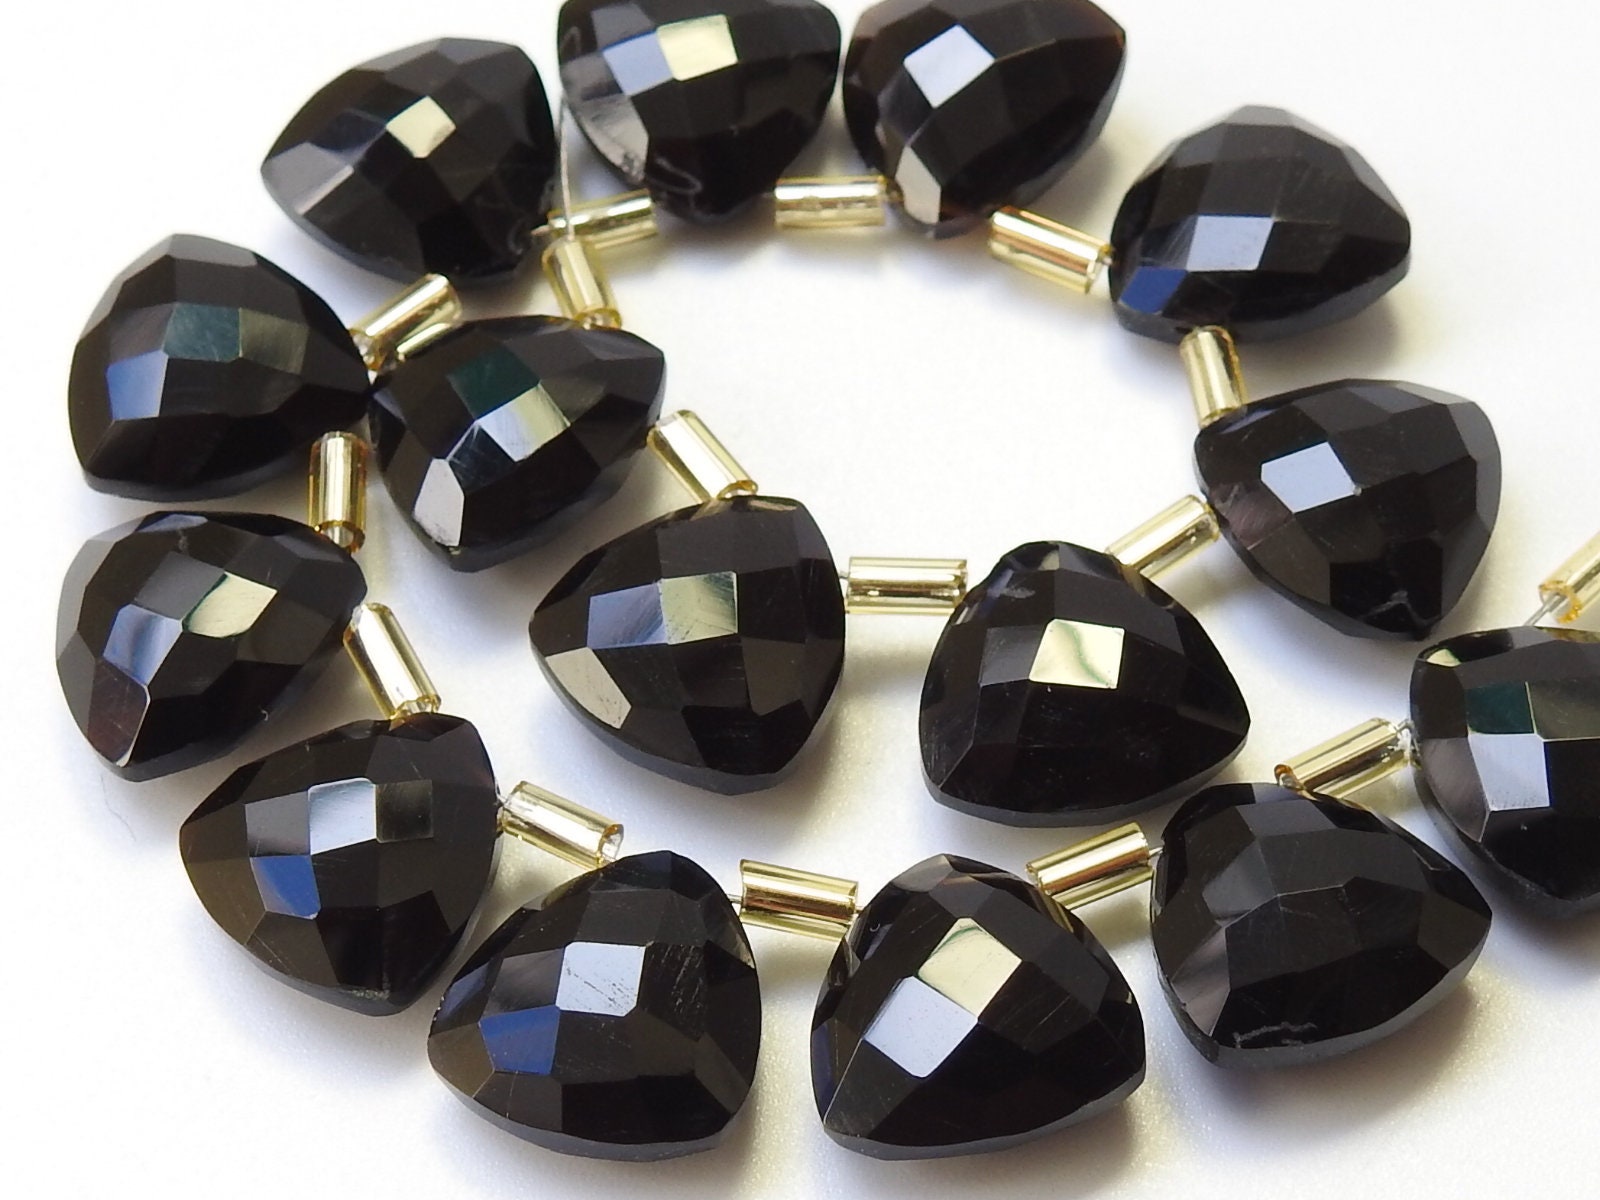 Black Onyx Faceted Trillions,Triangle,Drops,Teardrop,Briolettes,Earring Pair,12X12MM Approx,Wholesaler,Supplies,100%Natural PME-CY2 | Save 33% - Rajasthan Living 11